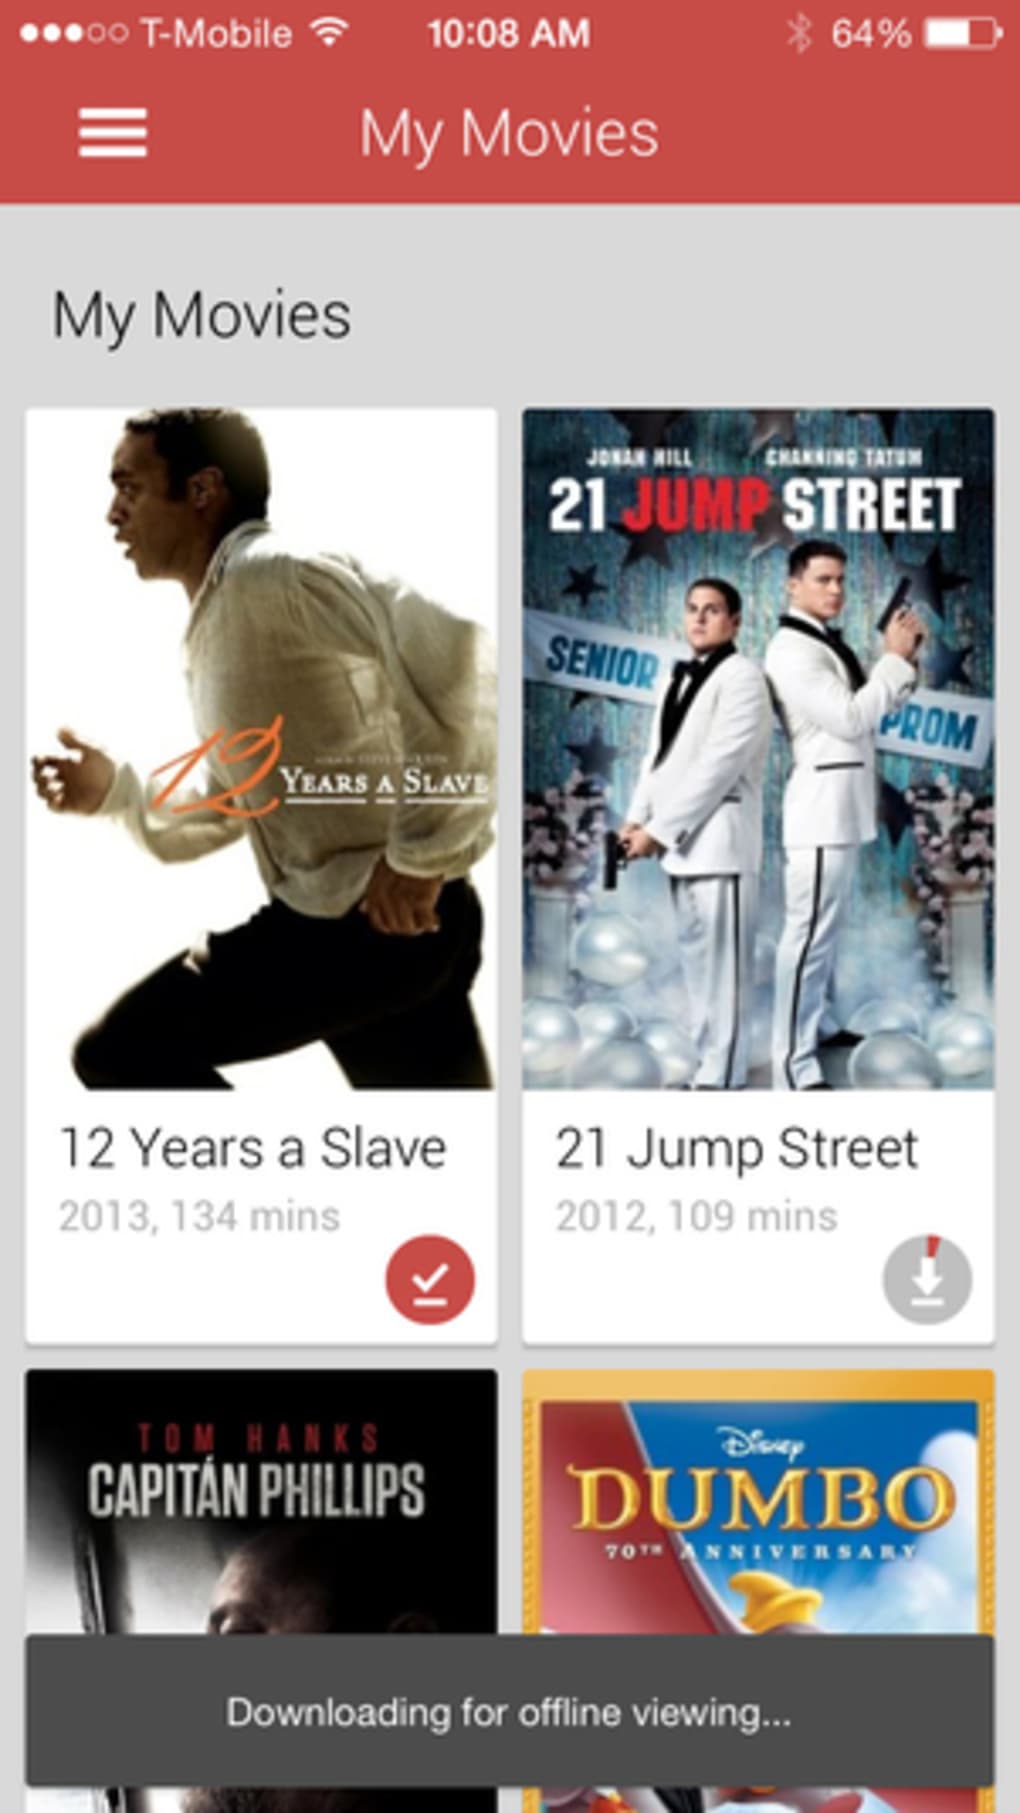 How to Download Movies From Google Play on Android, iPhone, or iPad